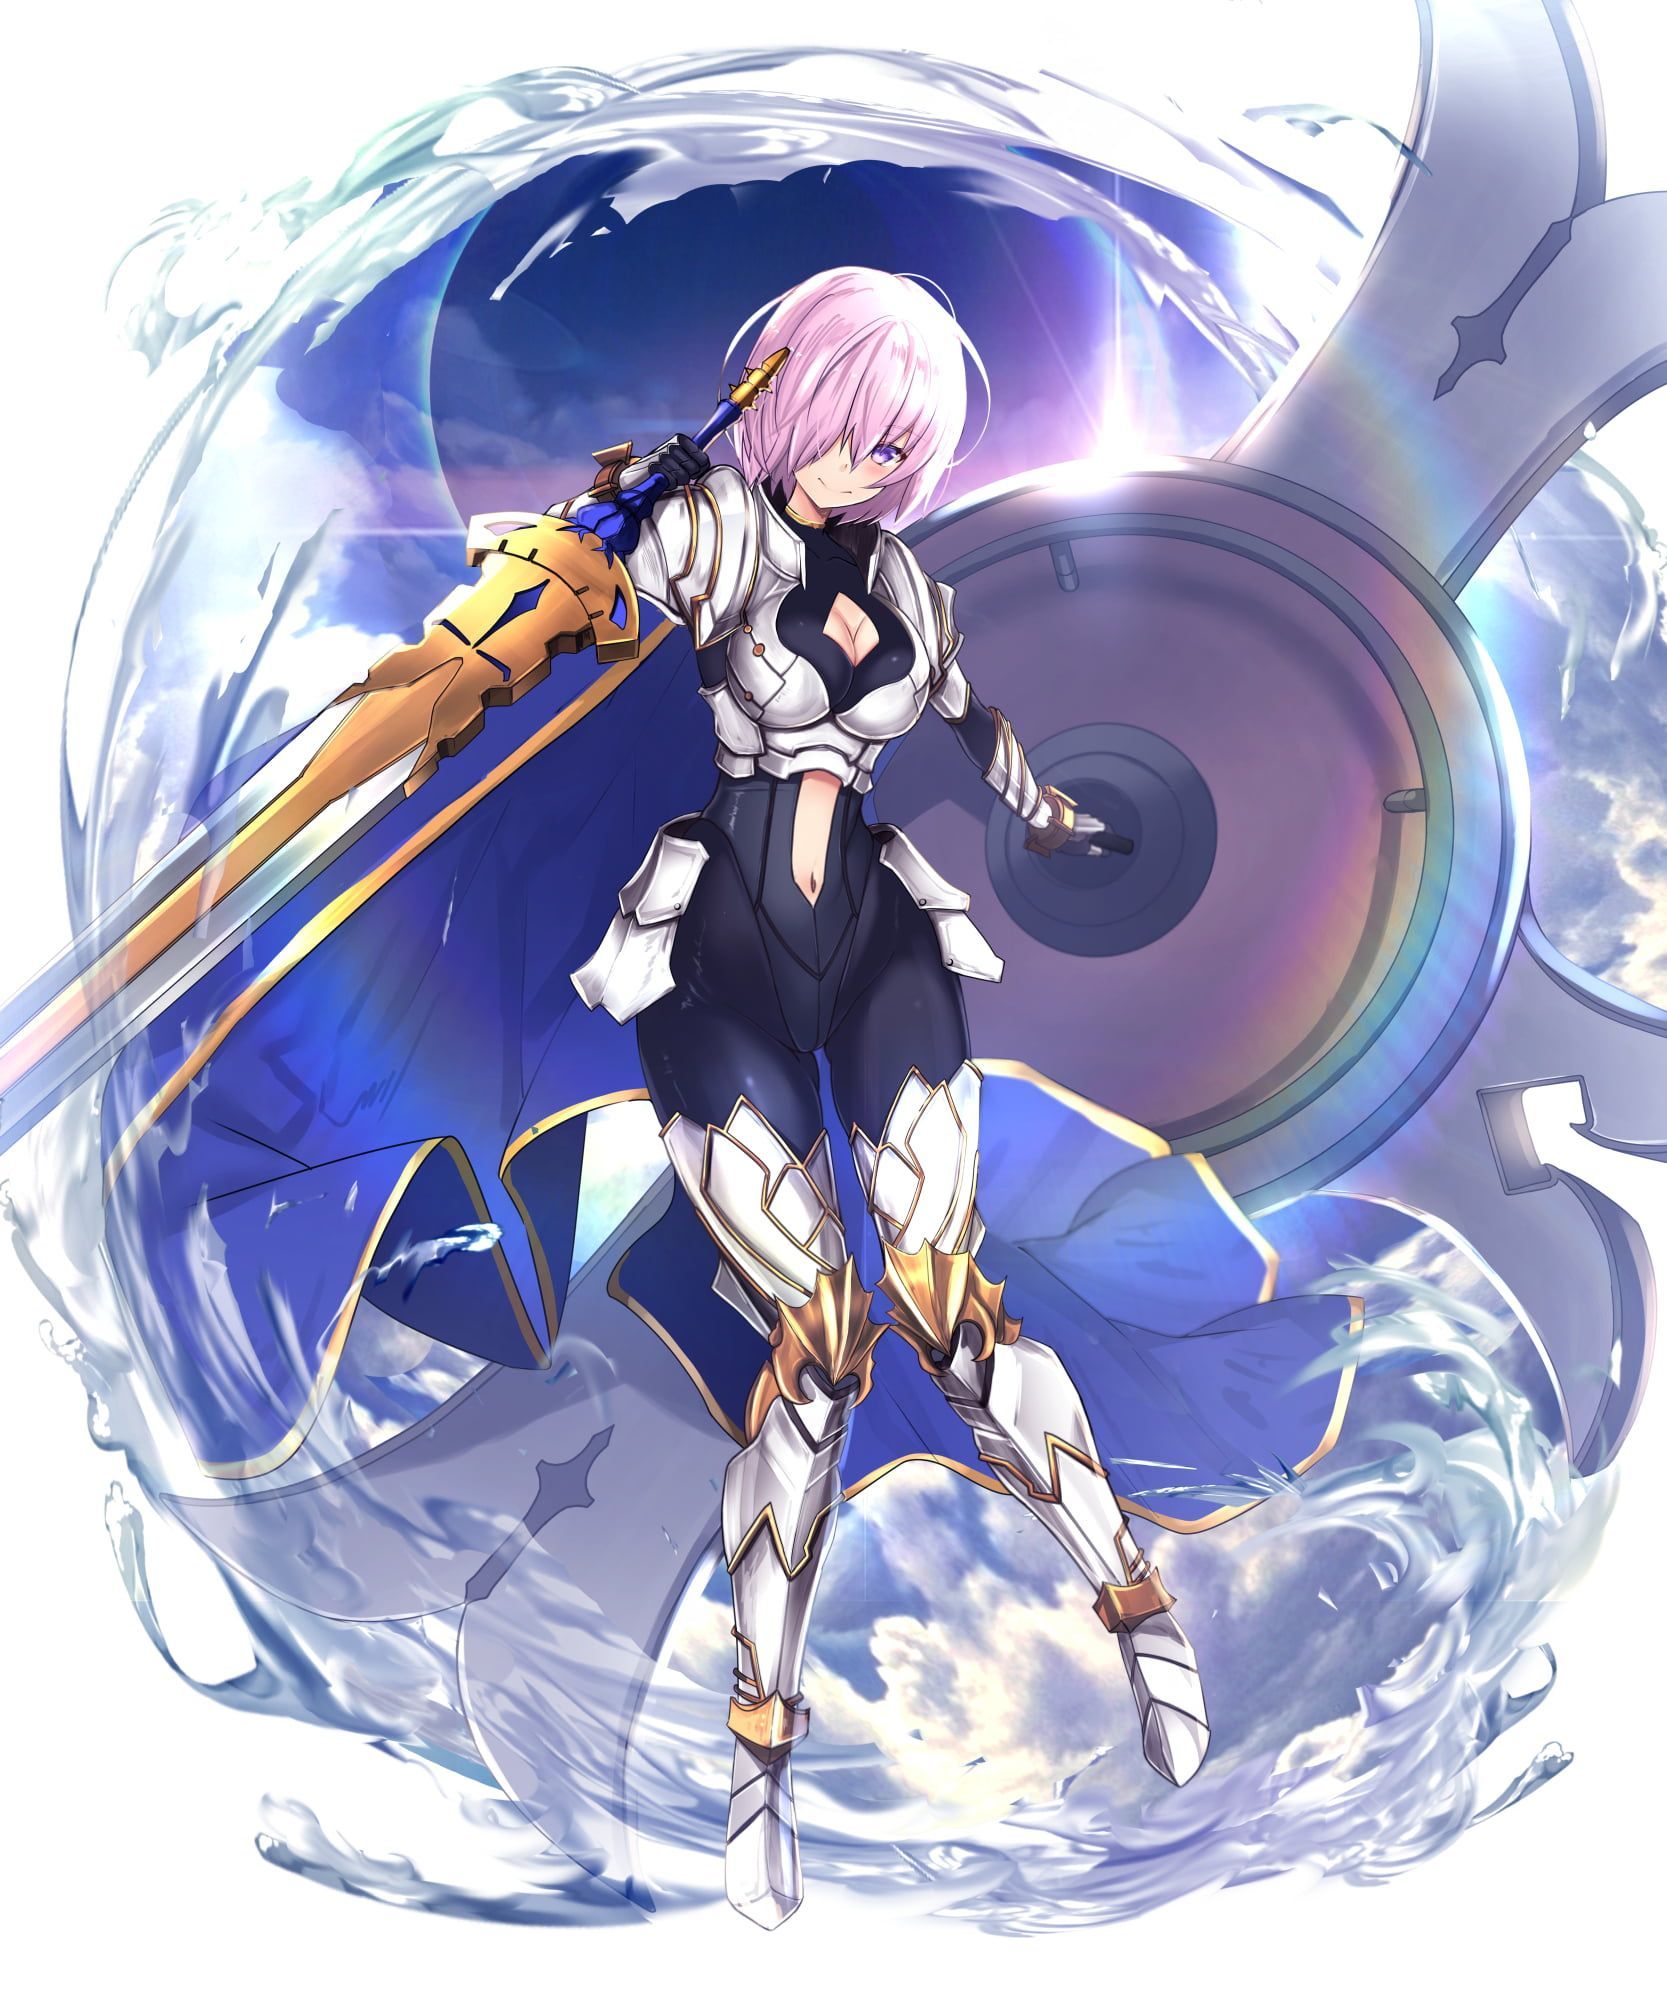 Mashu Kyrielight Wallpapers Wallpaper Cave 0336